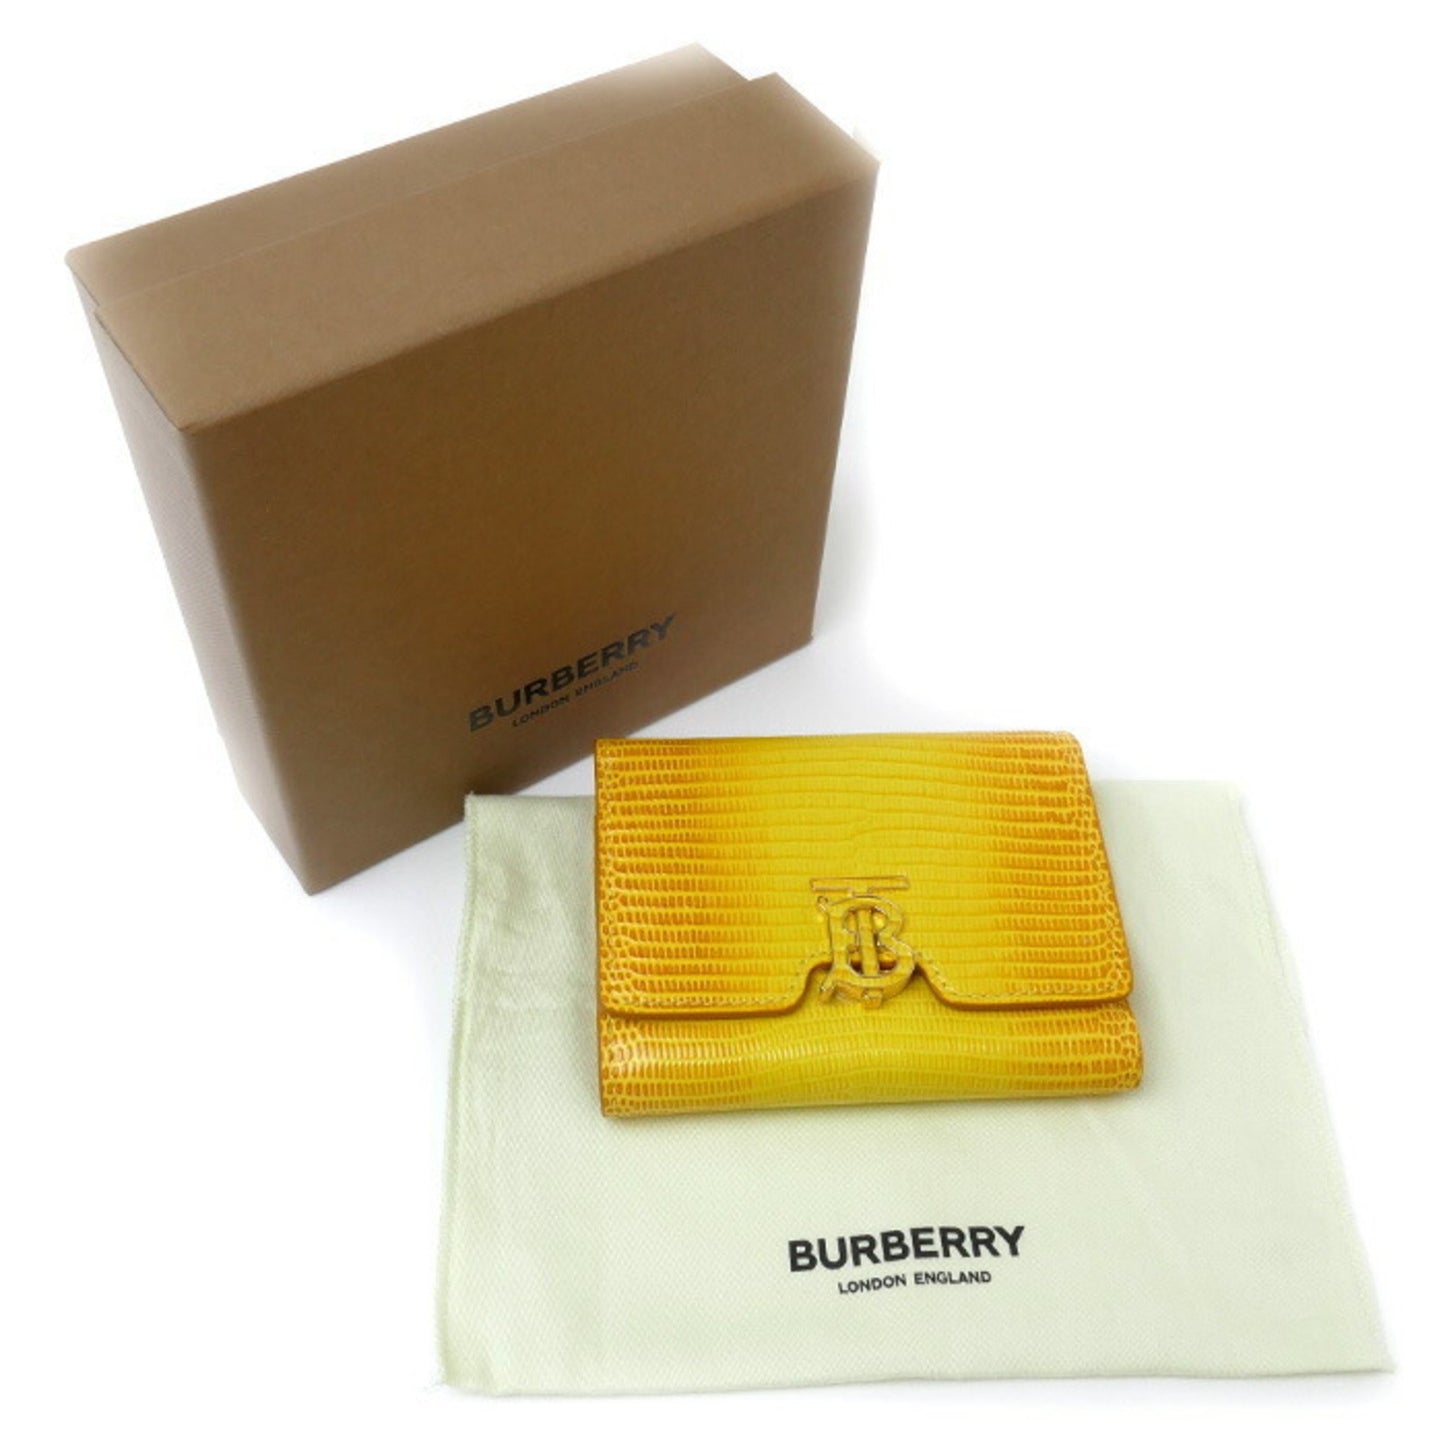 Burberry Women's Sophisticated Triple Leather Wallet in Yellow